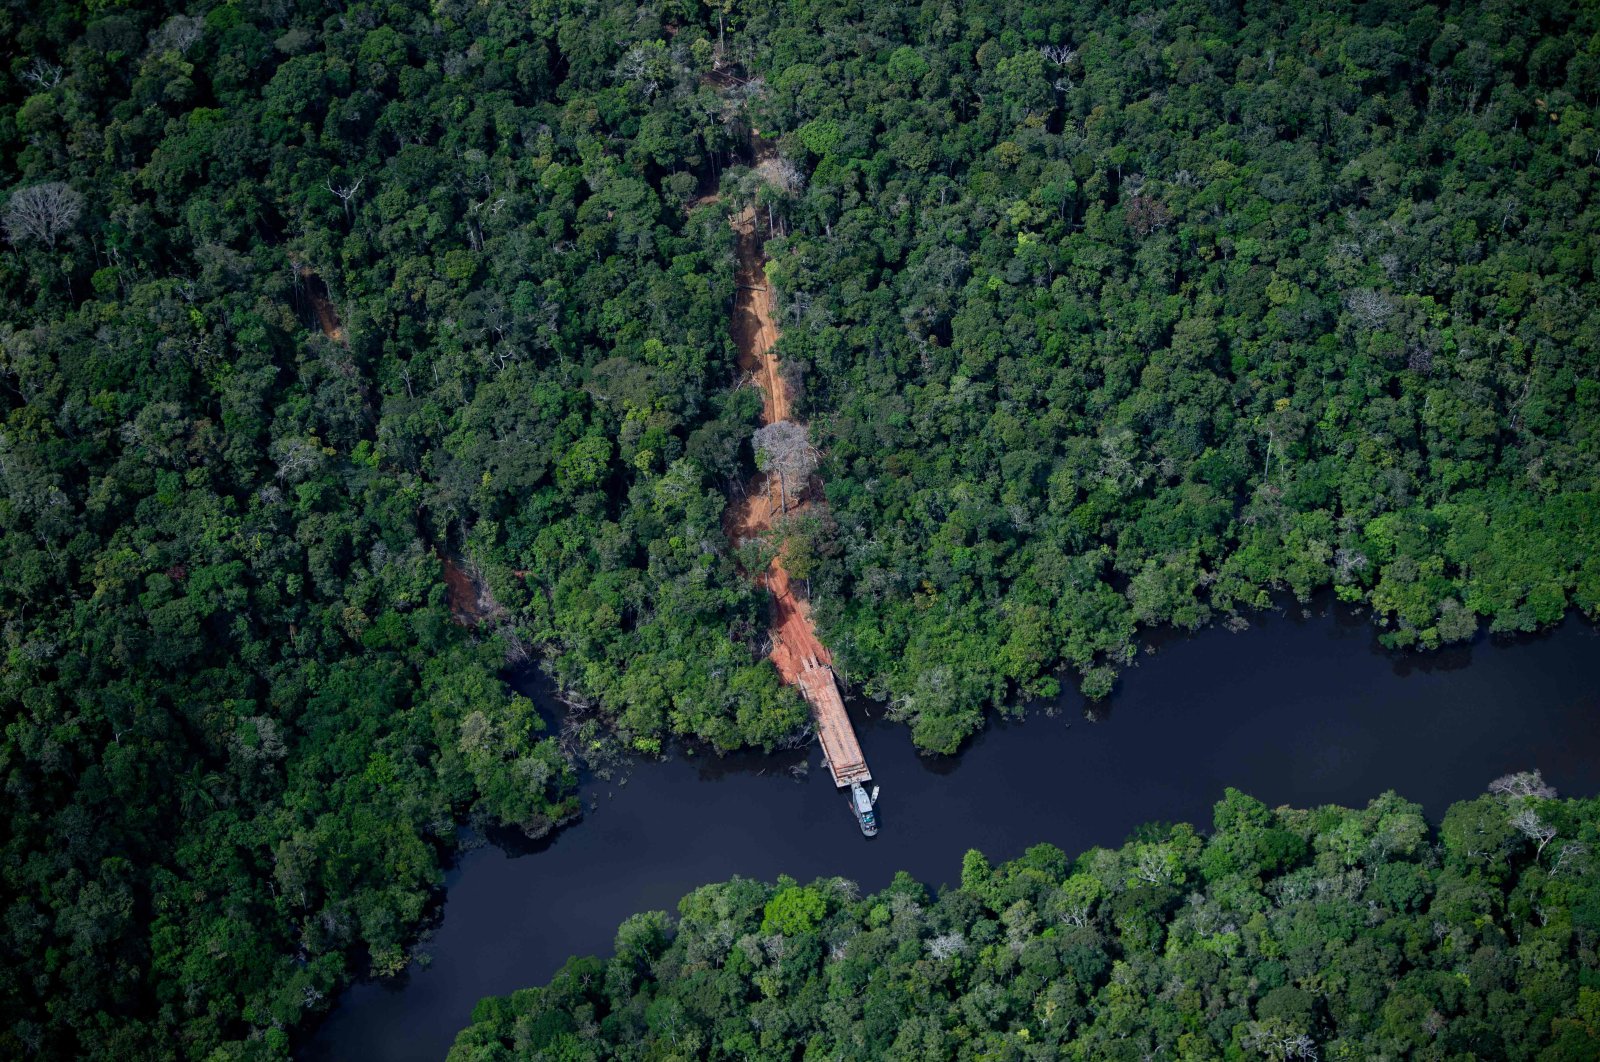 An aerial view showing an illegal dock by a river to remove wood from the Amazon rainforest seen during a flight between Manaus and Manicore, in Amazonas State, Brazil, June 6, 2022. (AFP Photo)